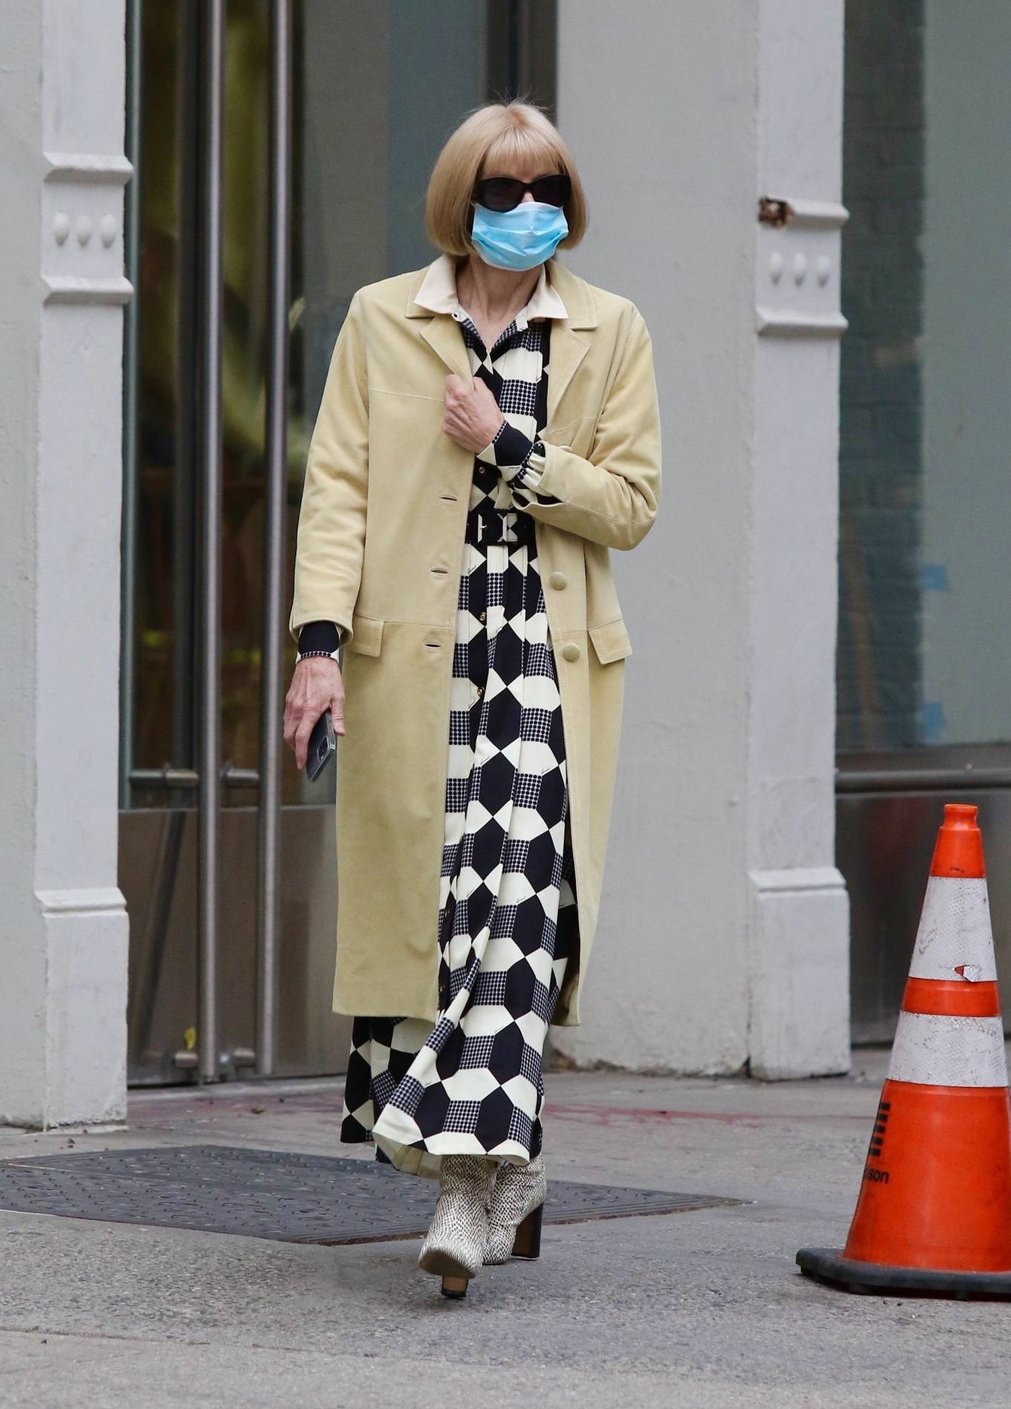 Anna Wintour 2021 : Anna Wintour – Seen in a patterned dress and snakeskin leather boots in Manhattan’s Soho area-01